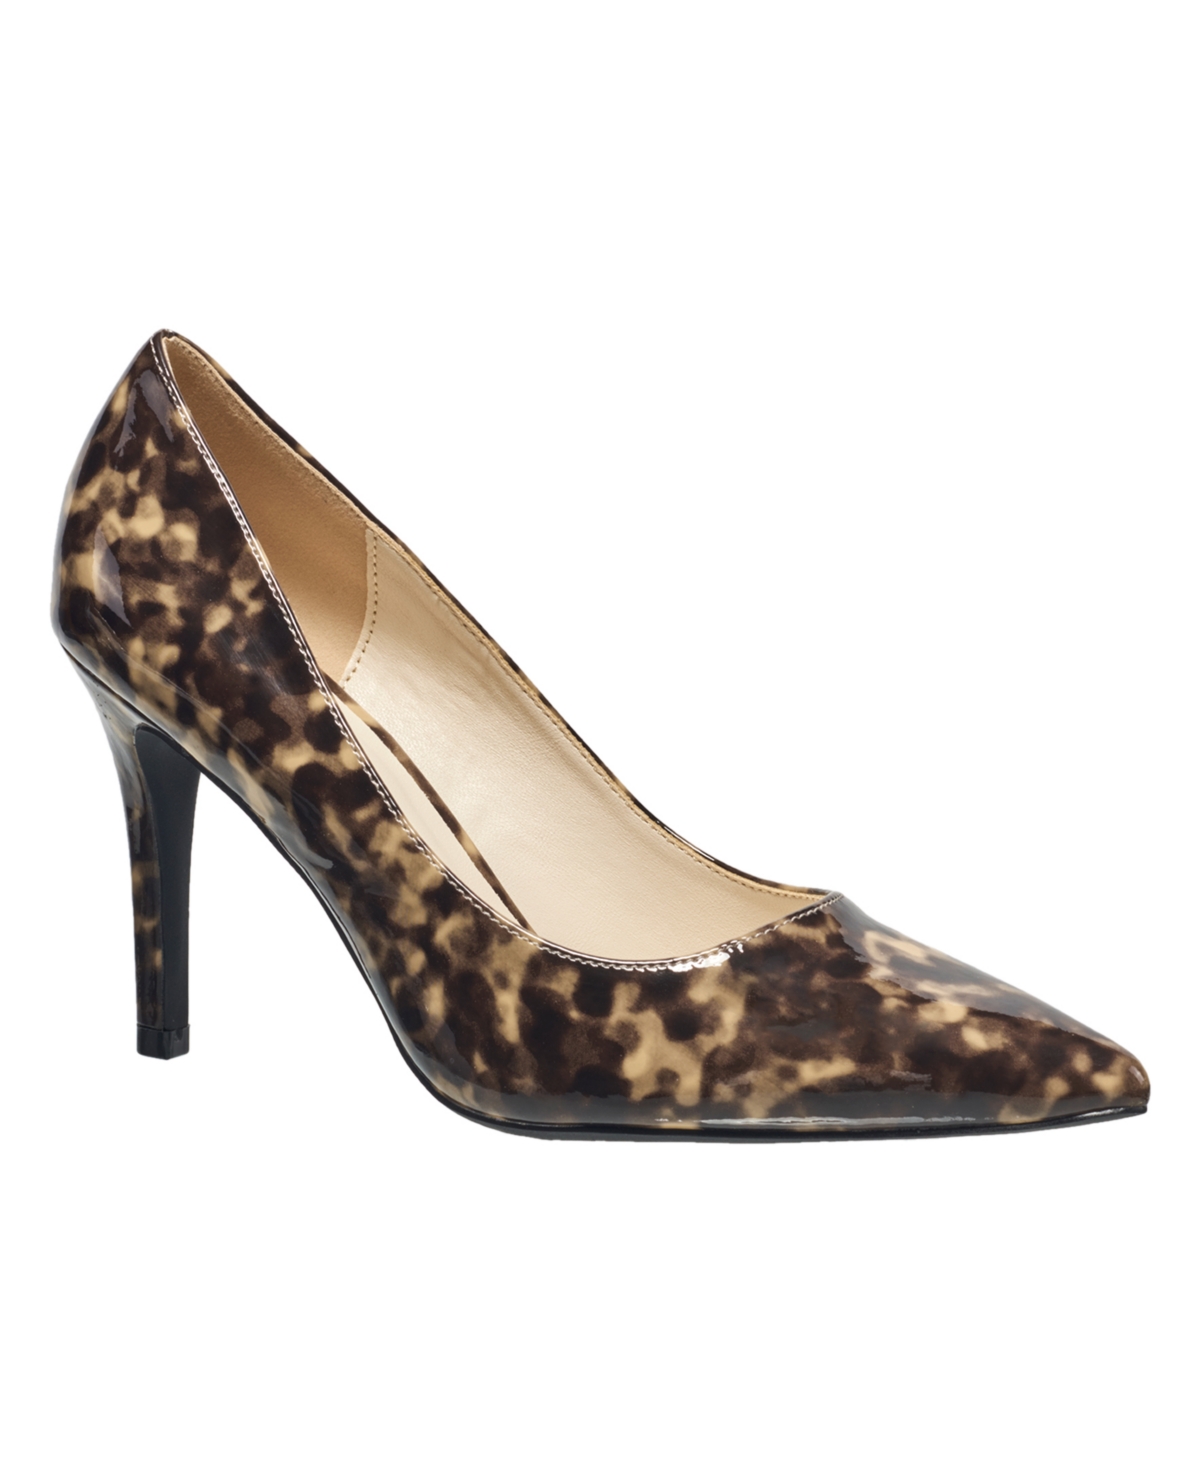 Women's Gayle Pointed Pumps - Tortoise